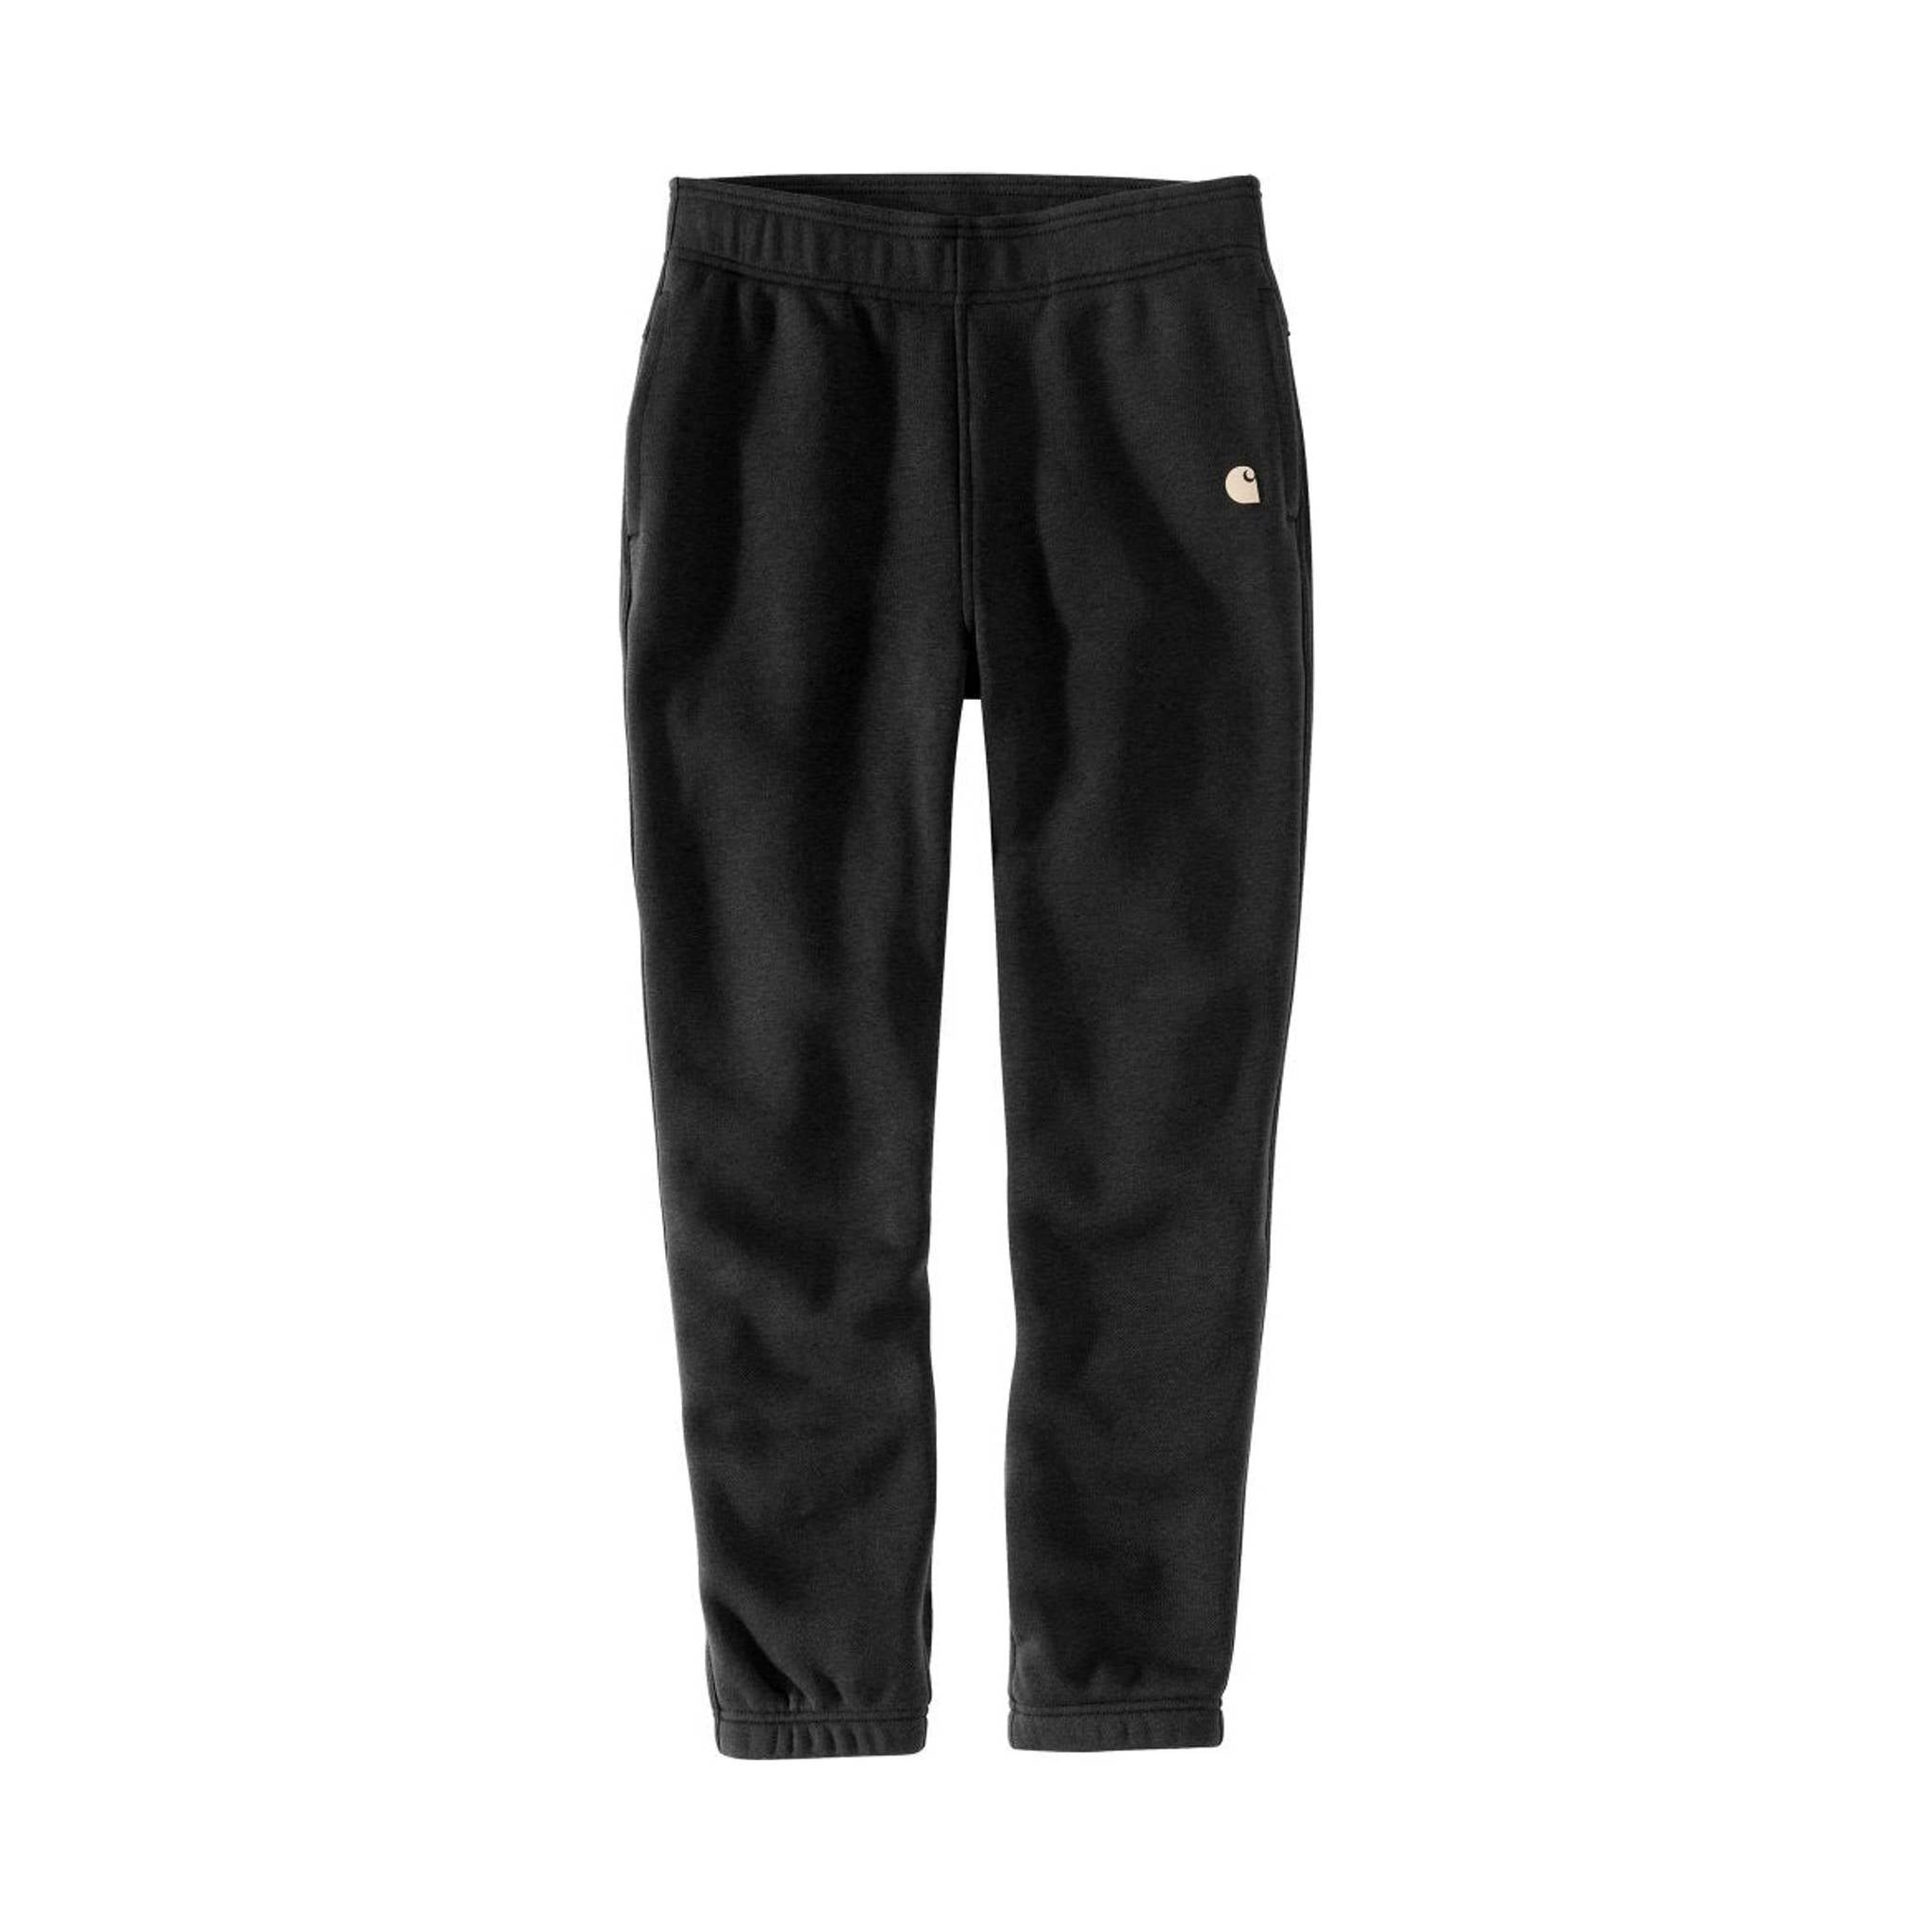 Carhartt Women's Relaxed Fit Sweatpants - Traditions Clothing